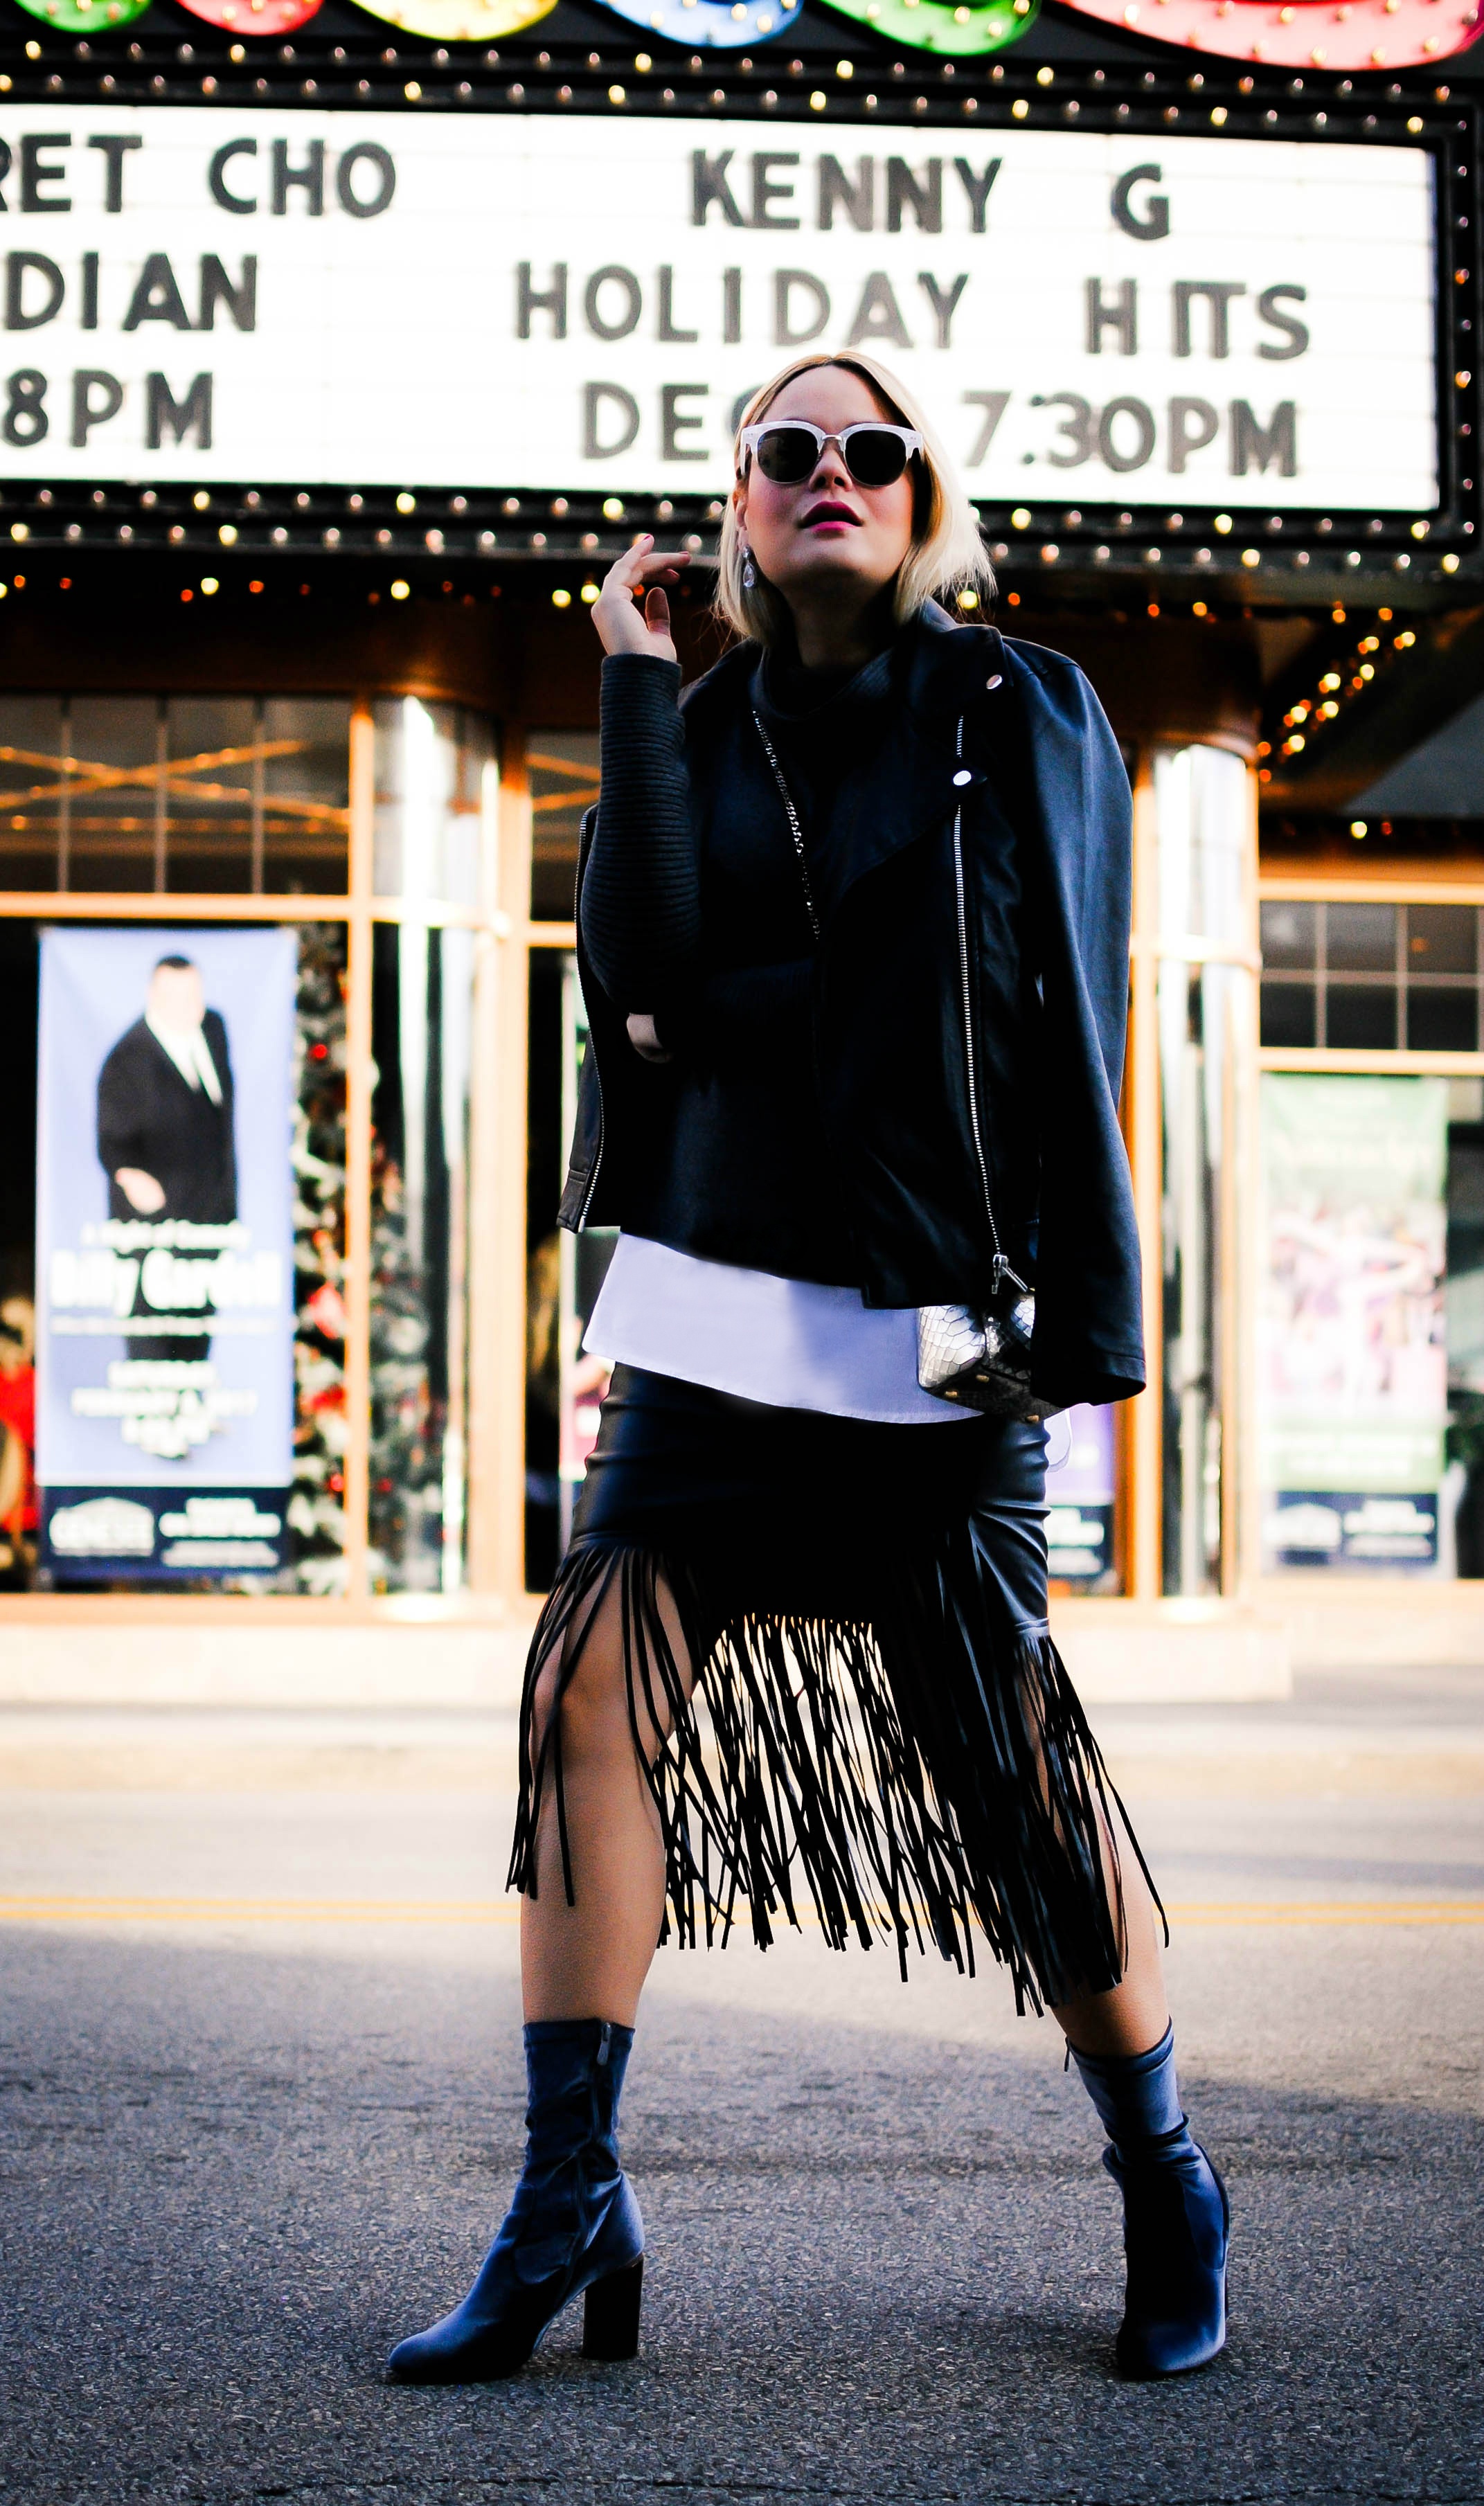 vanessa-lambert-blogger-behind-what-would-v-wear-shows-how-to-wear-fringe-during-winter-wearing-a-leather-fringe-skirt-and-velvet-booties_7-2